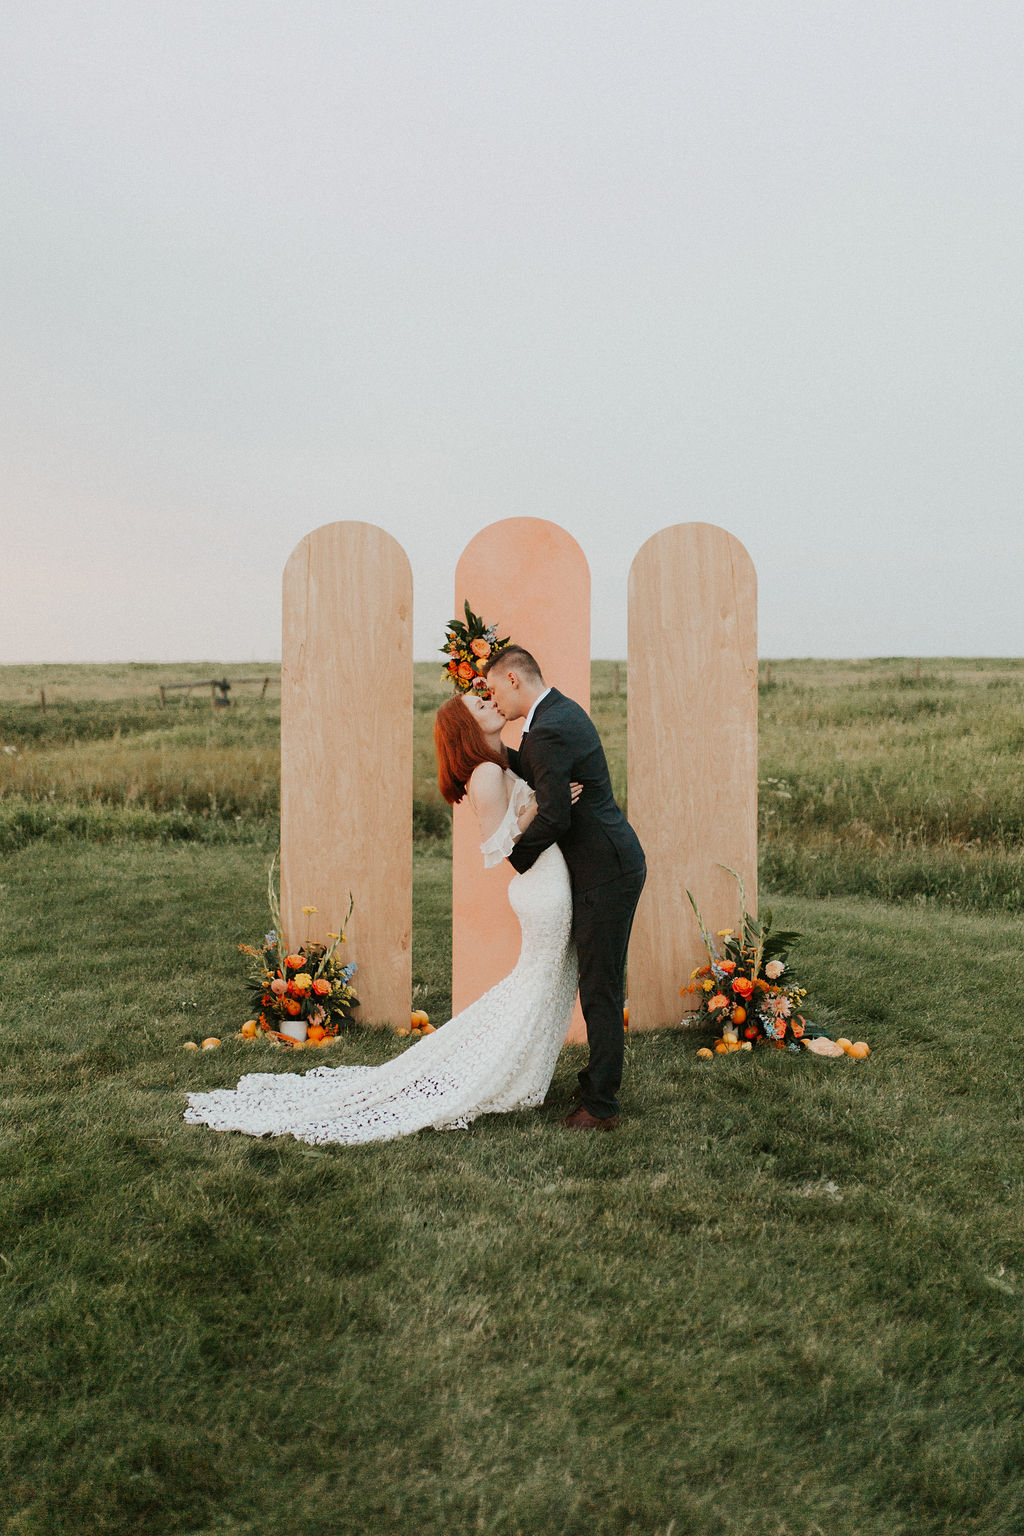 Bride and groom share a first kiss in front of their unique wooden panel backdrop for their tangerine inspired wedding